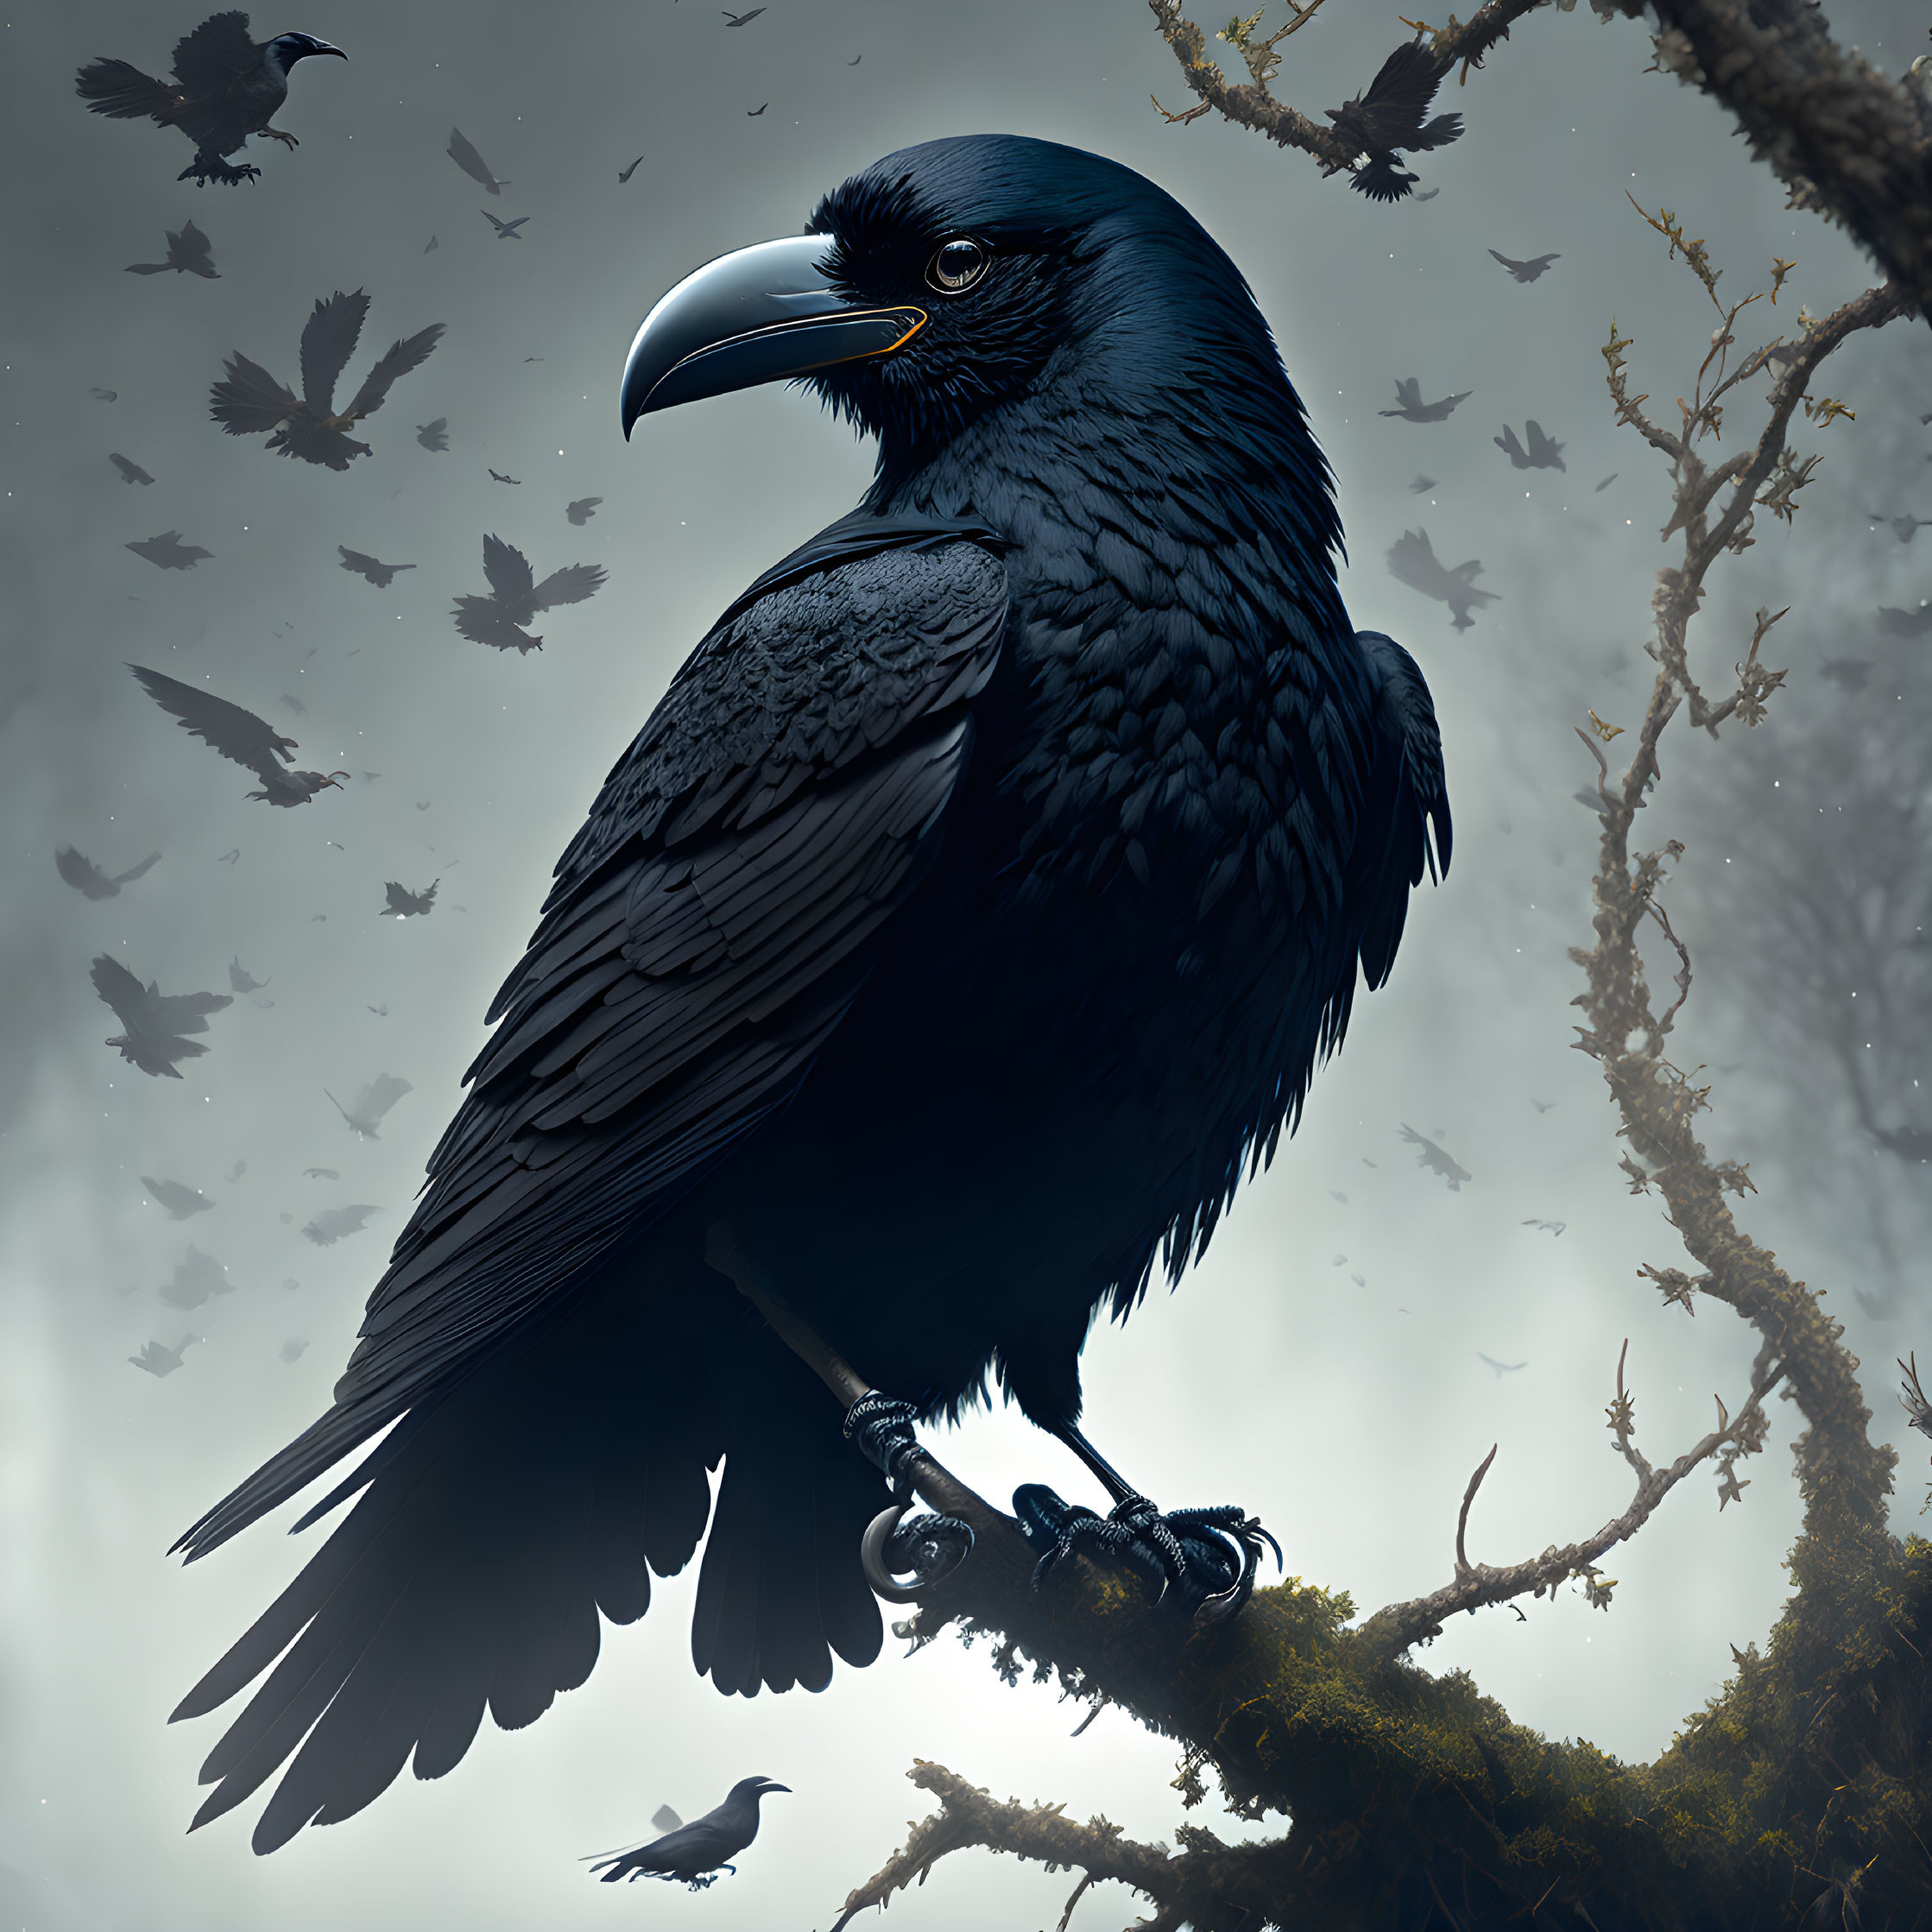 Detailed image of raven on branch with silhouetted ravens against moody sky